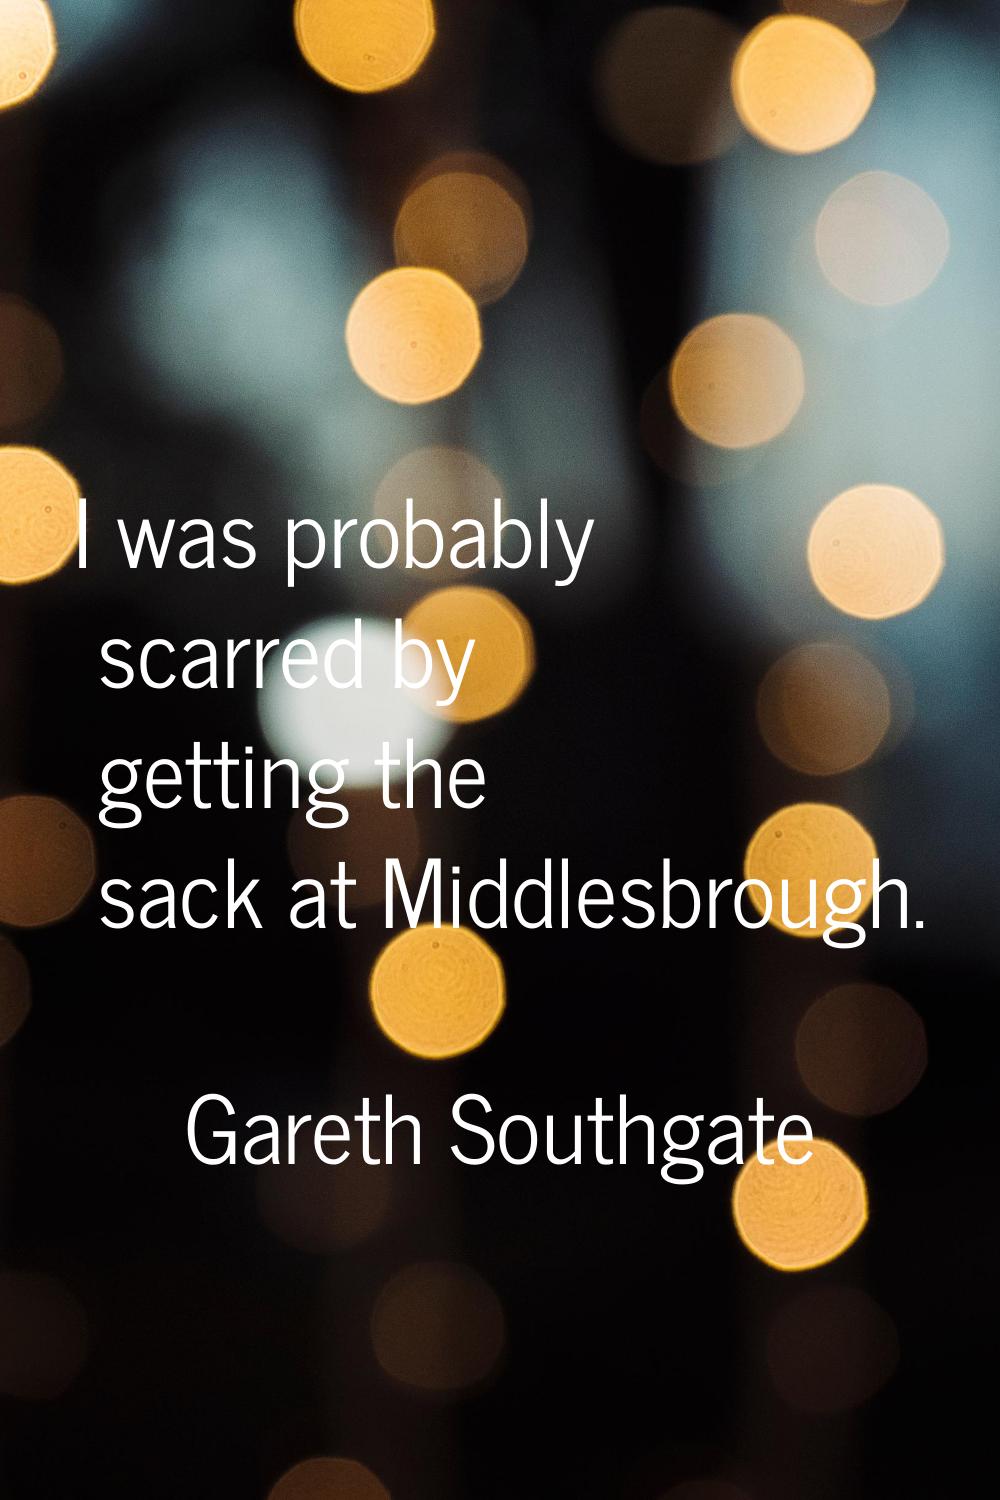 I was probably scarred by getting the sack at Middlesbrough.